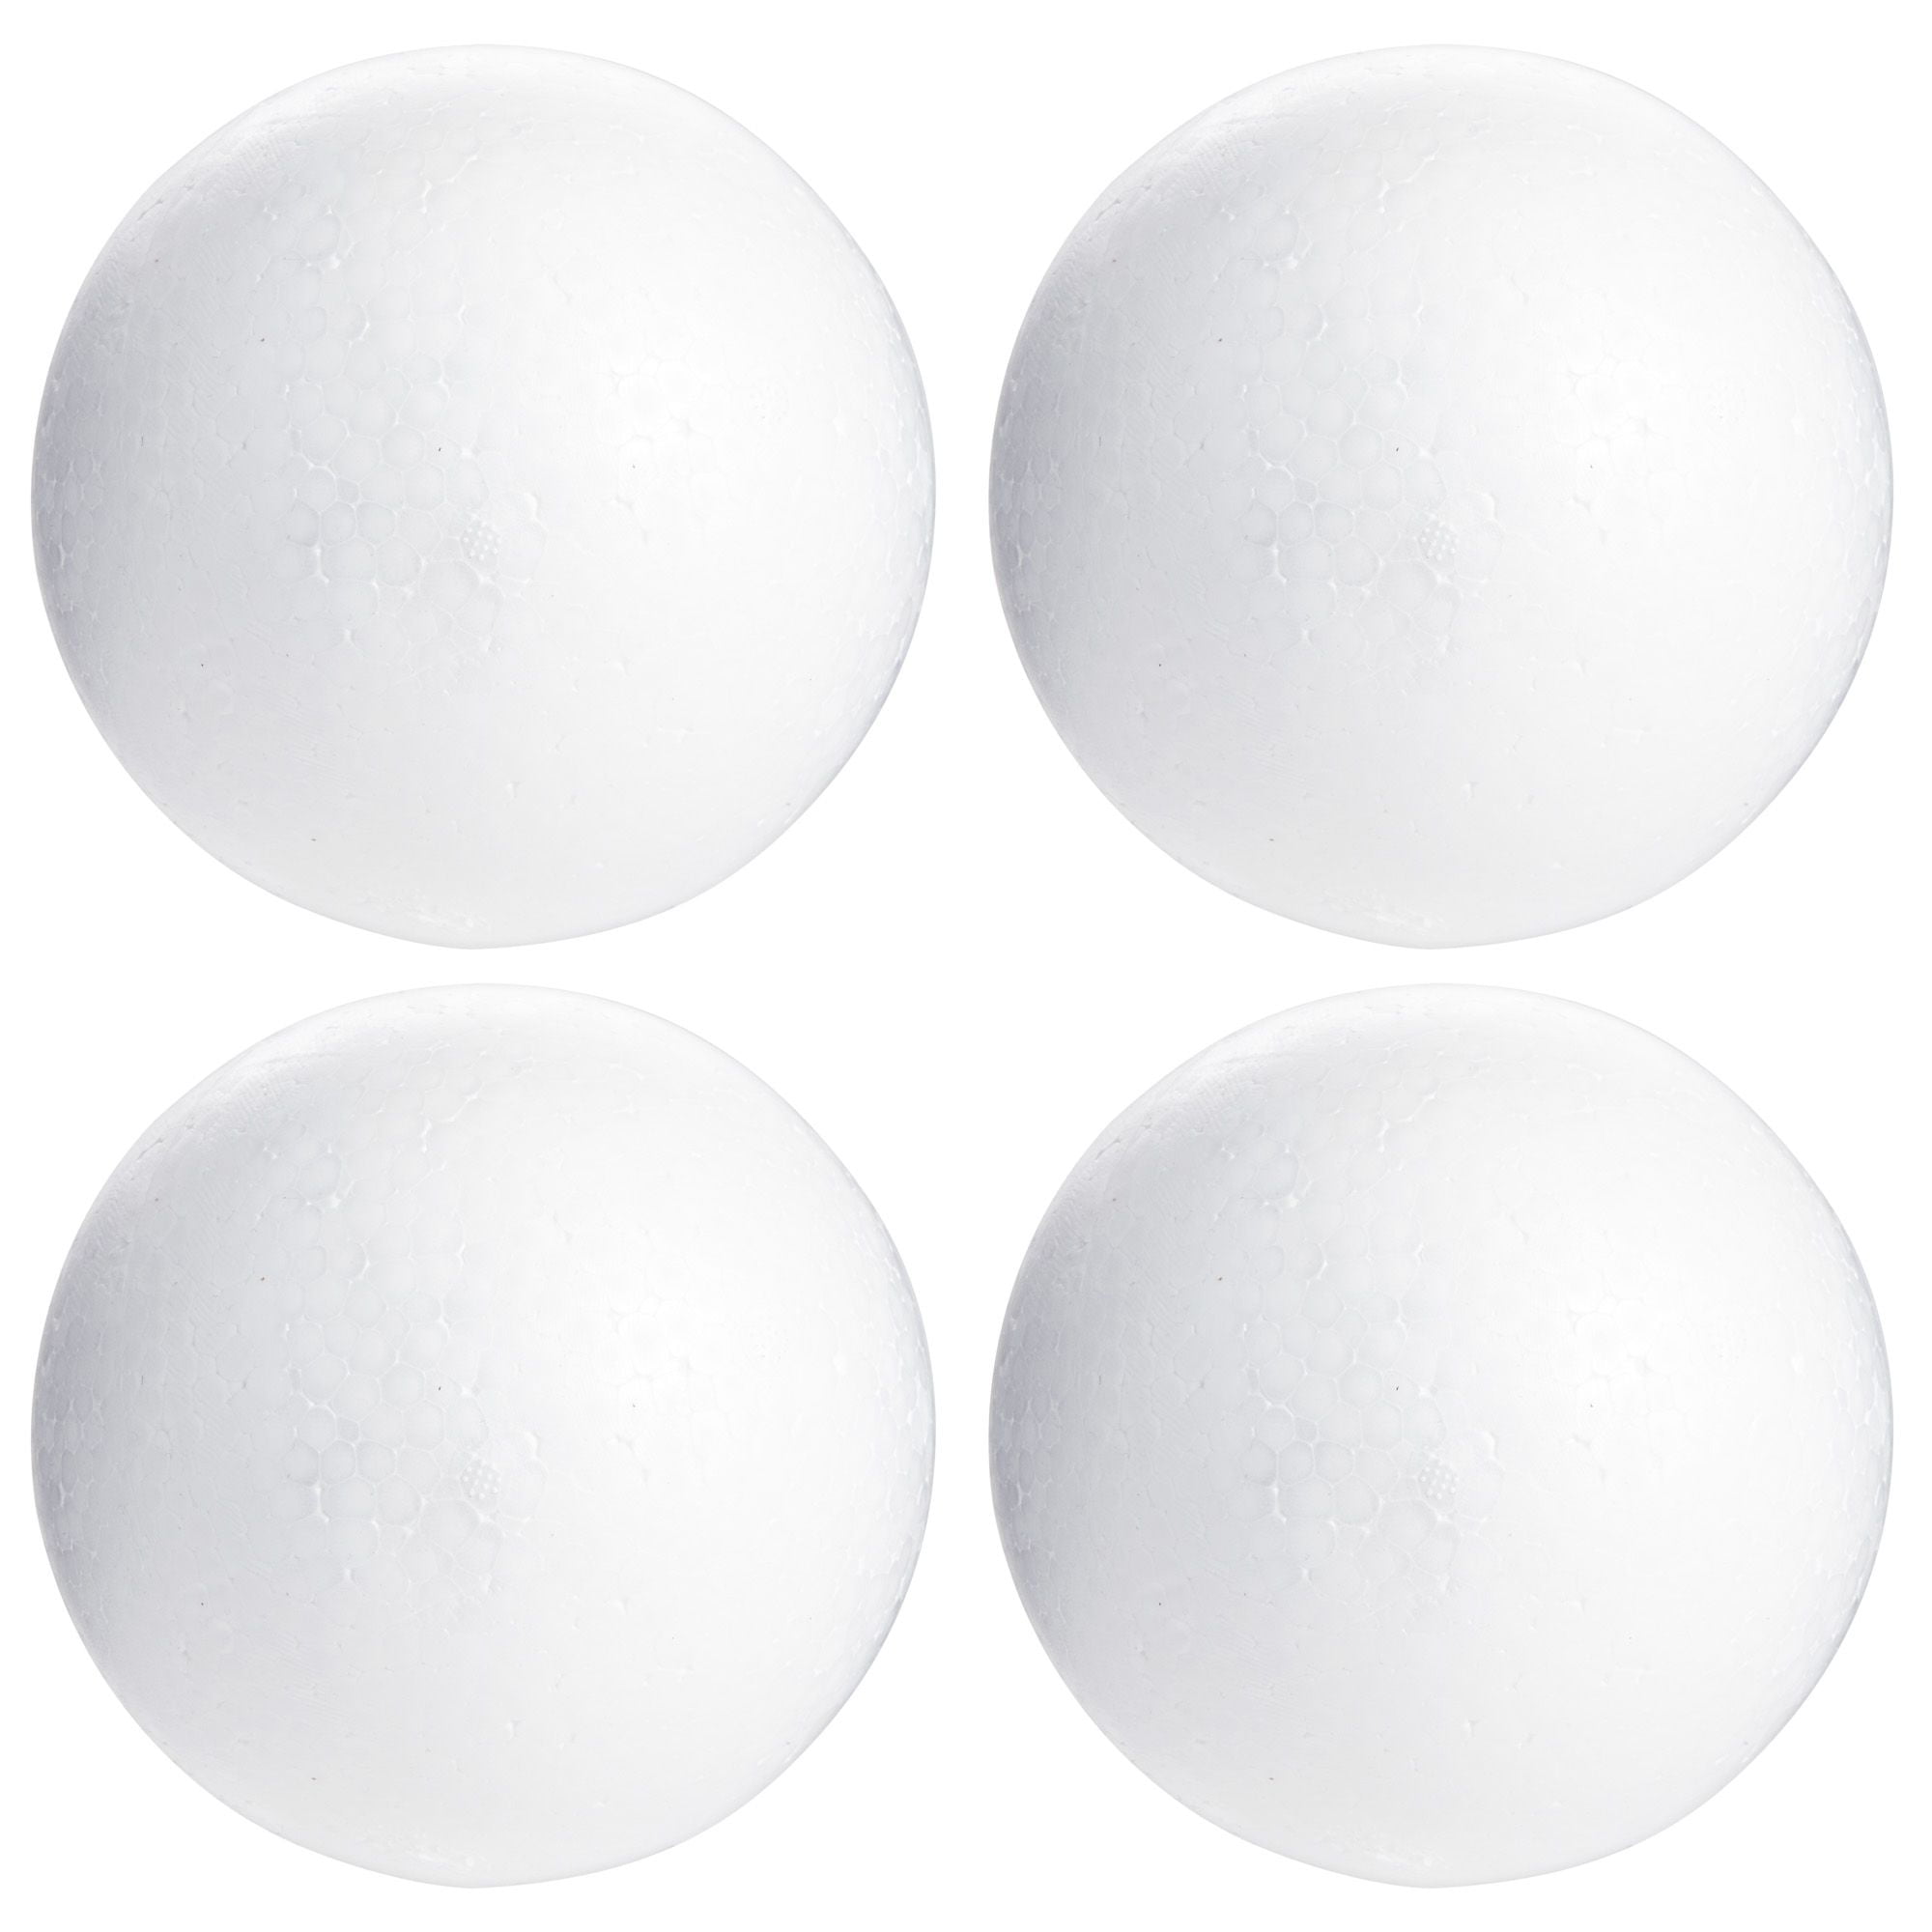 6 Styrofoam Balls 5in by Quick Candles